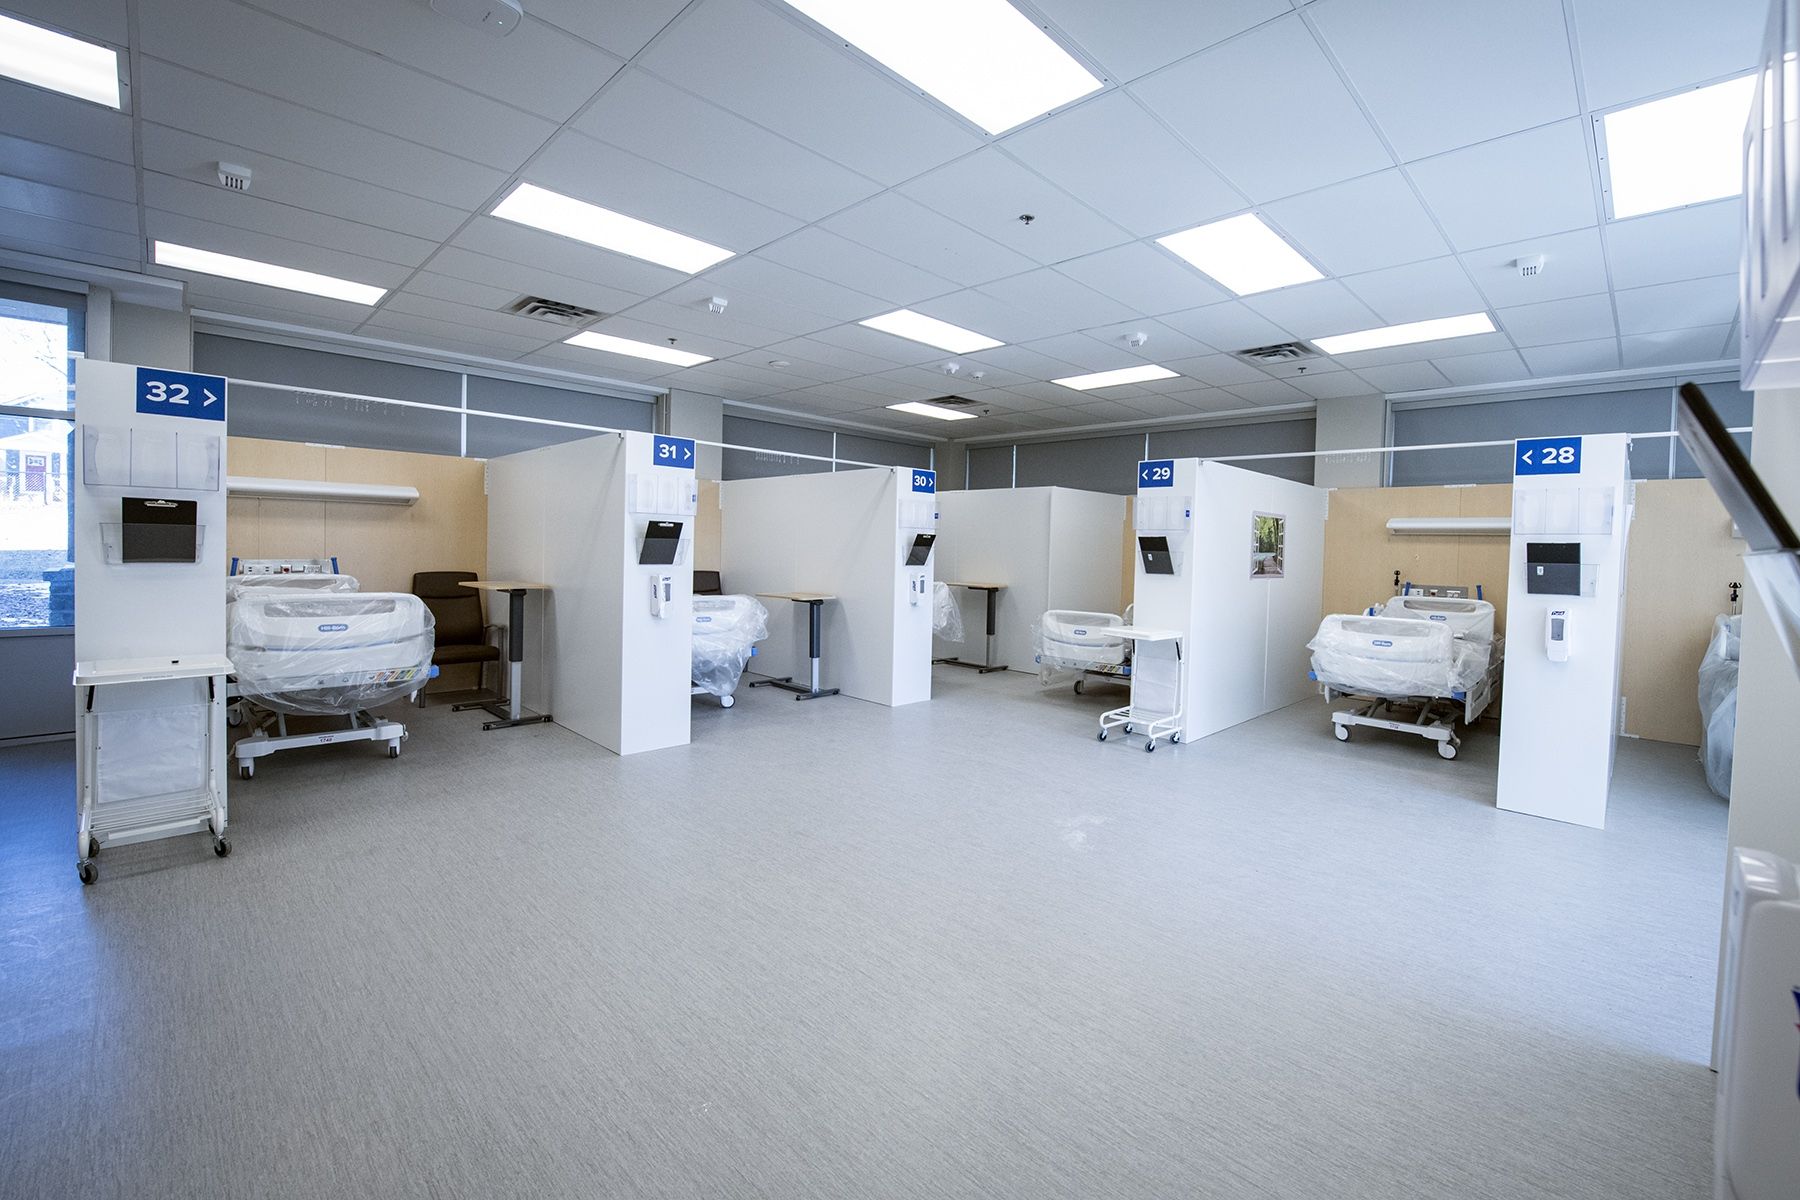 A patient care area at the Union Street site. 